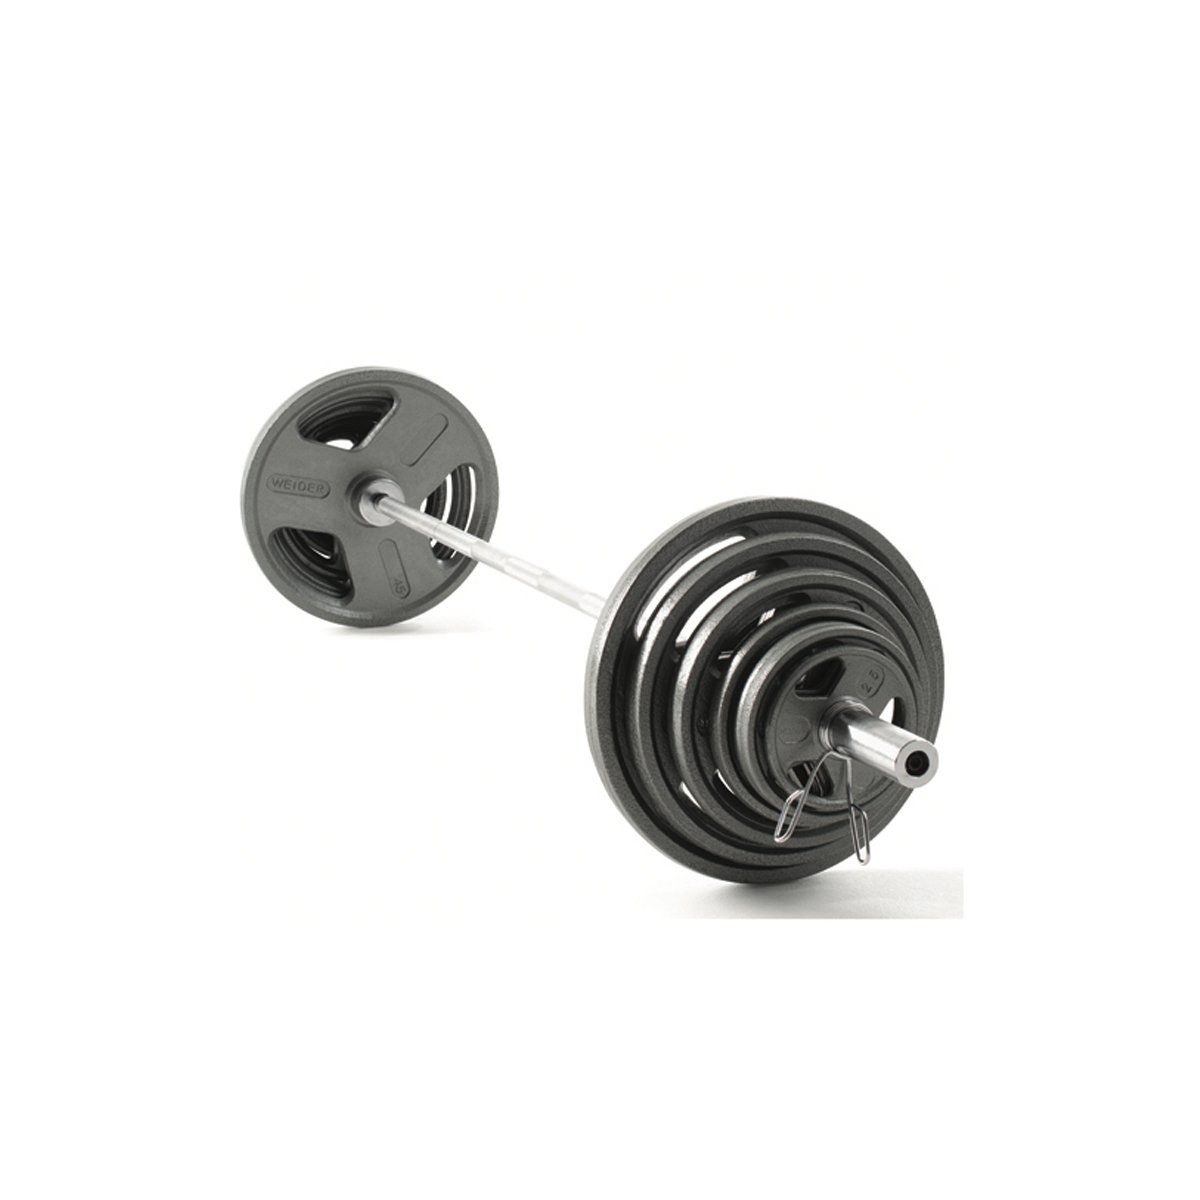 fitness gear 300 lb weight set review